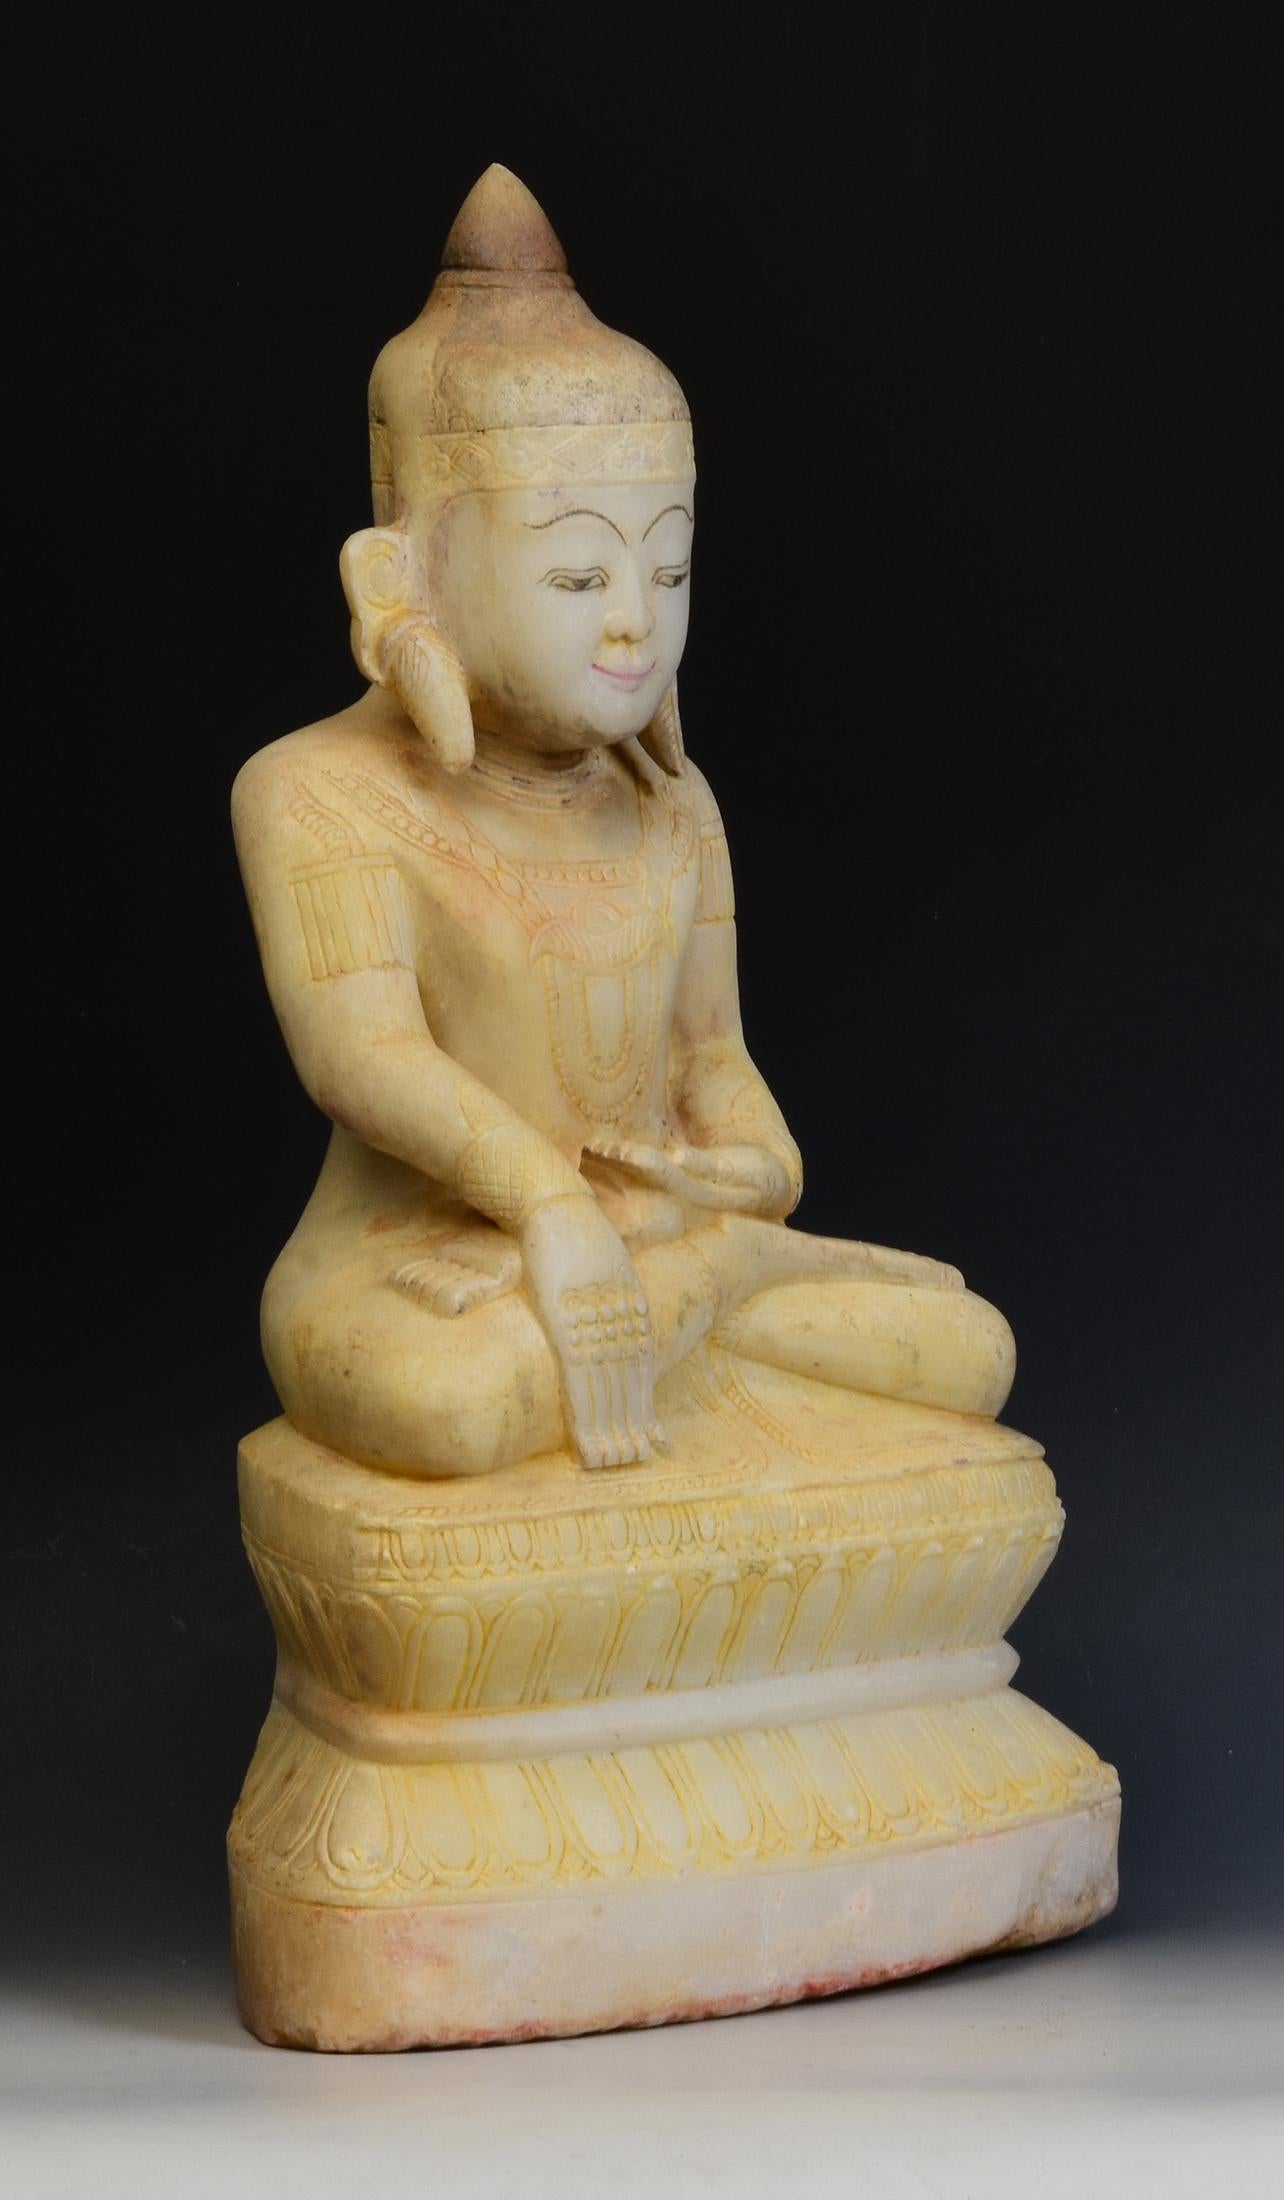 15th Century, Ava, Antique Burmese Alabaster Marble Seated Crowned Buddha Statue 14